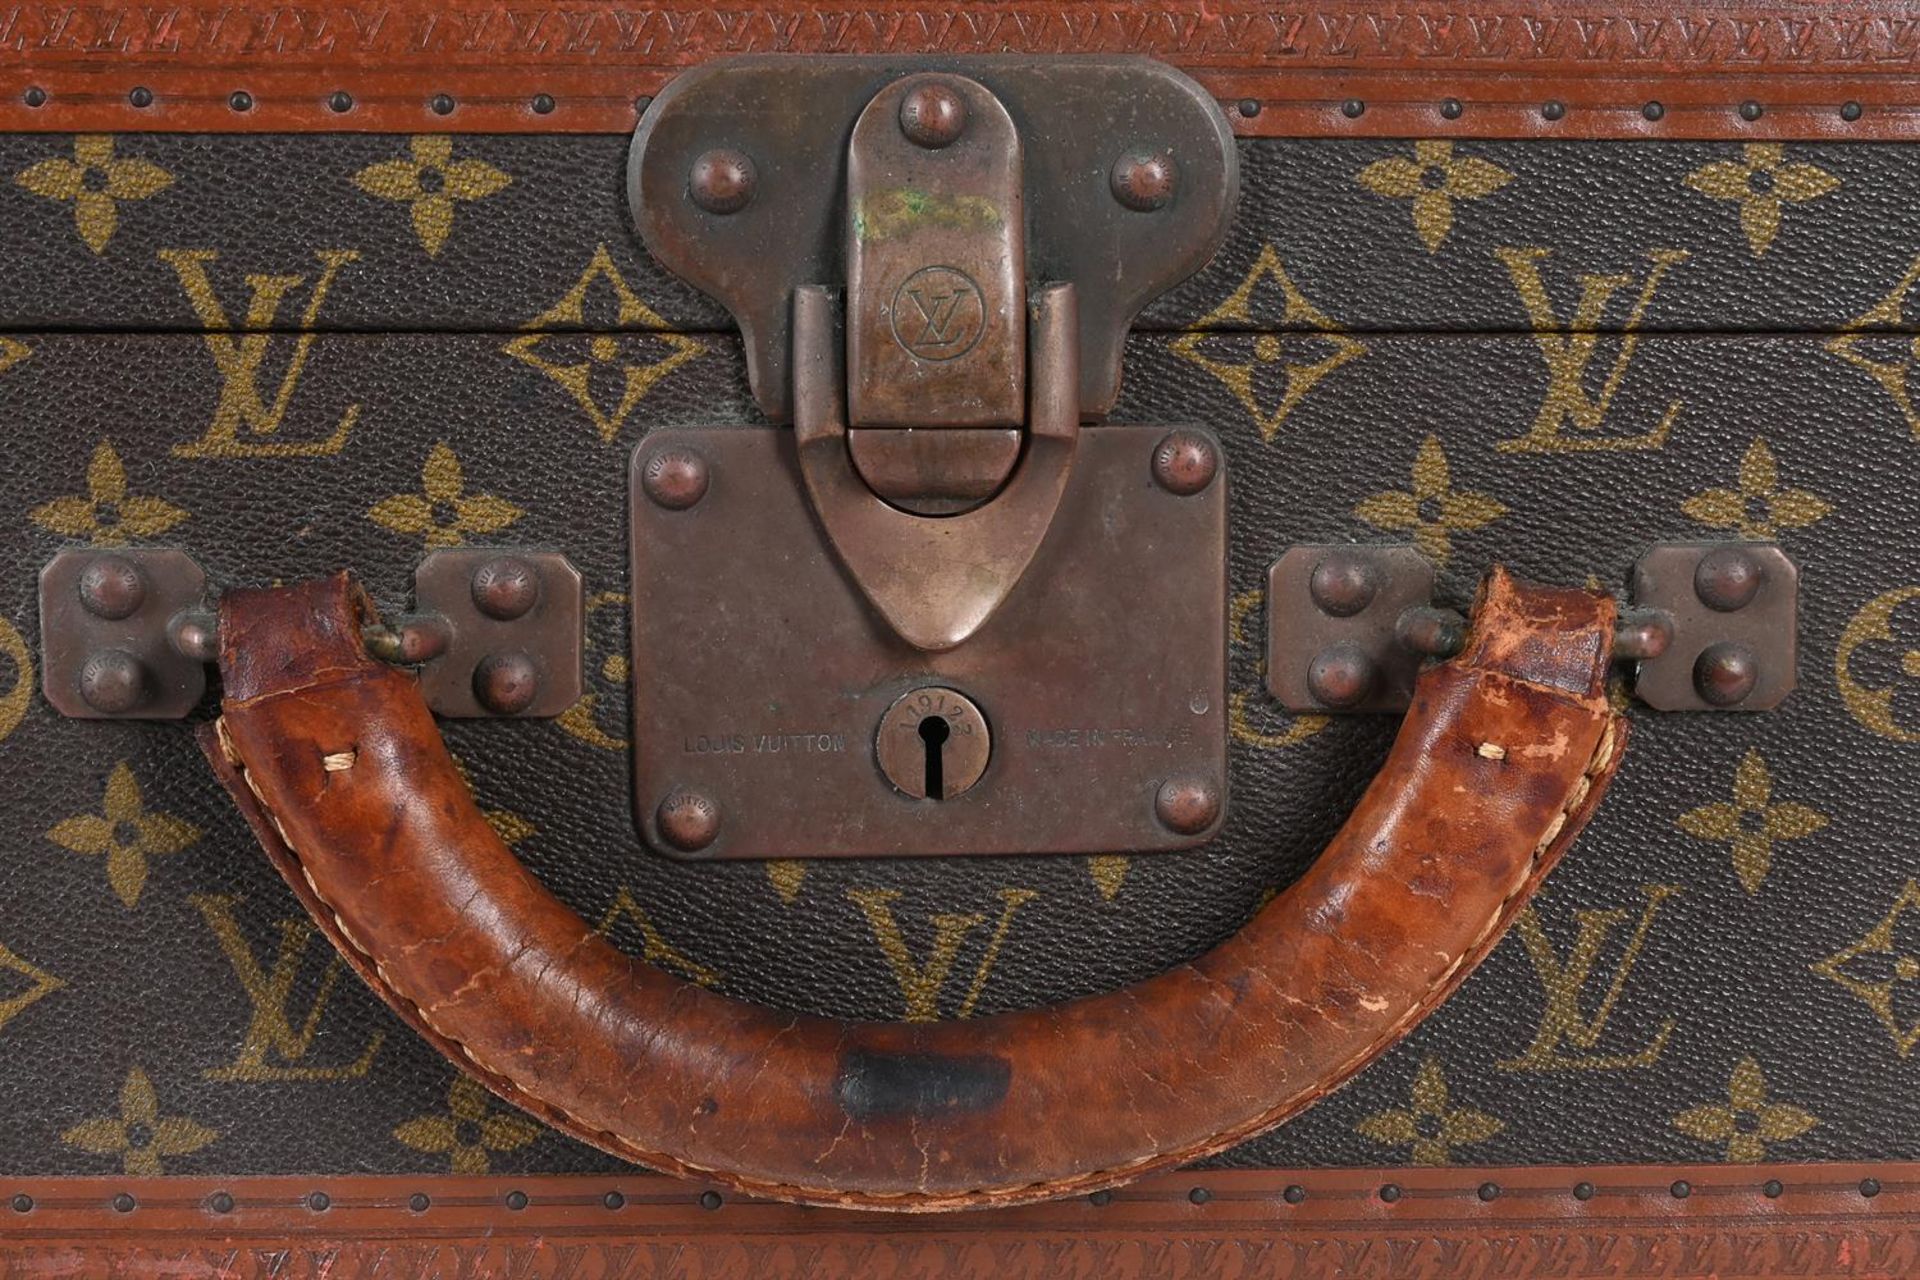 LOUIS VUITTON A MONOGRAMMED COATED CANVAS HARD SUITCASE - Image 2 of 3